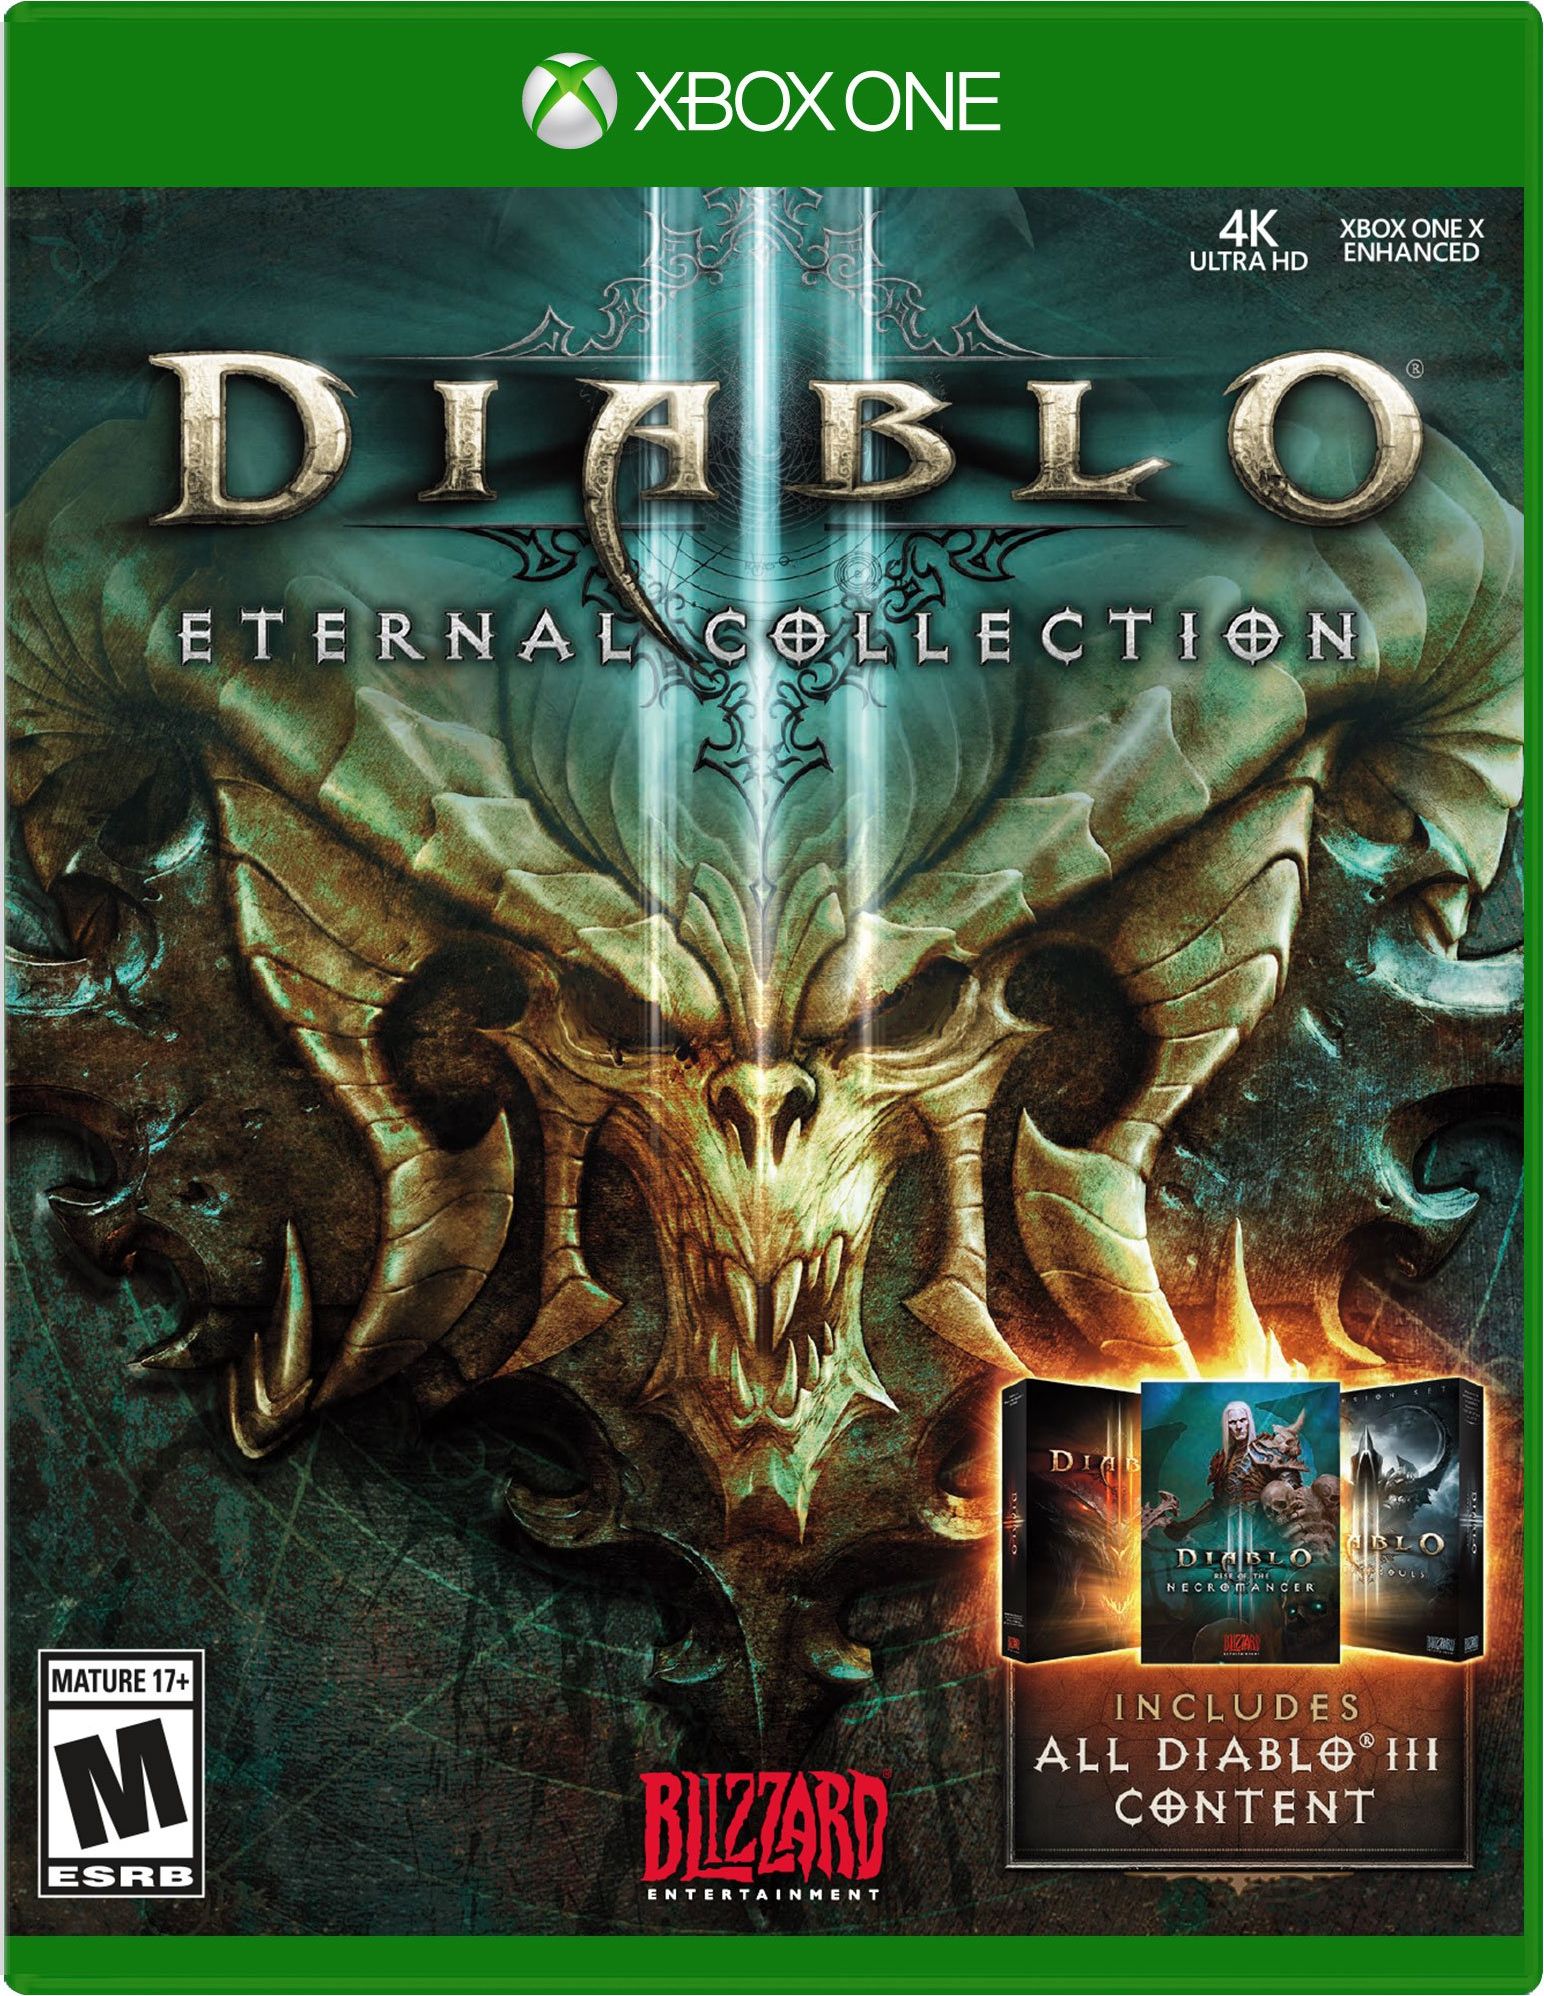 Diablo III Eternal Collection Release Date (Xbox One, PS4)